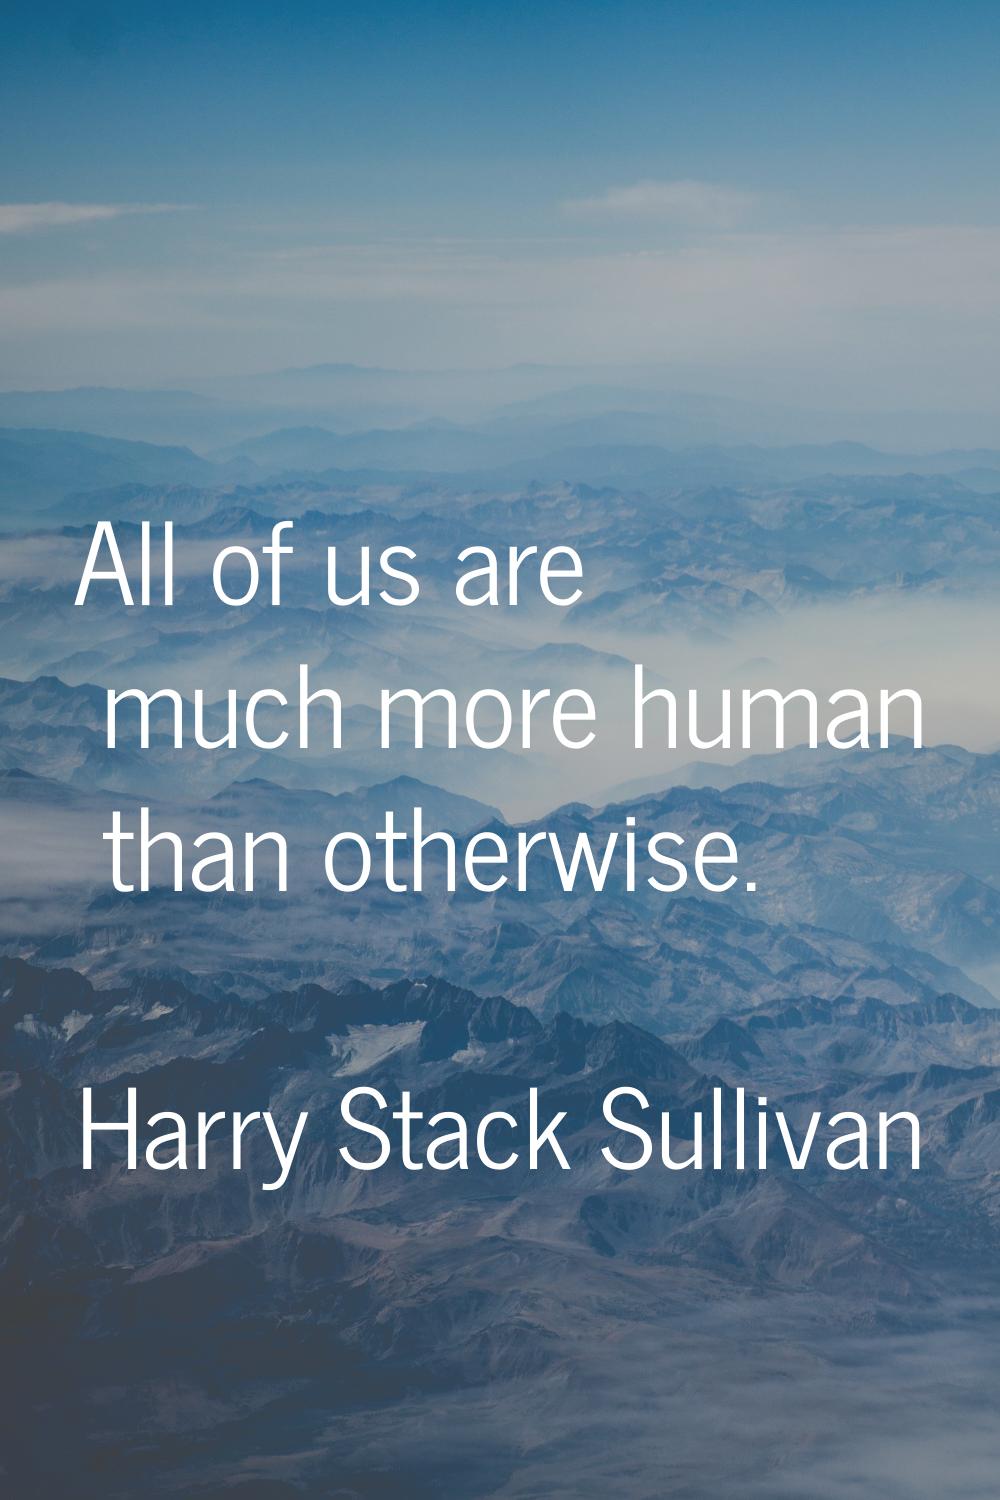 All of us are much more human than otherwise.